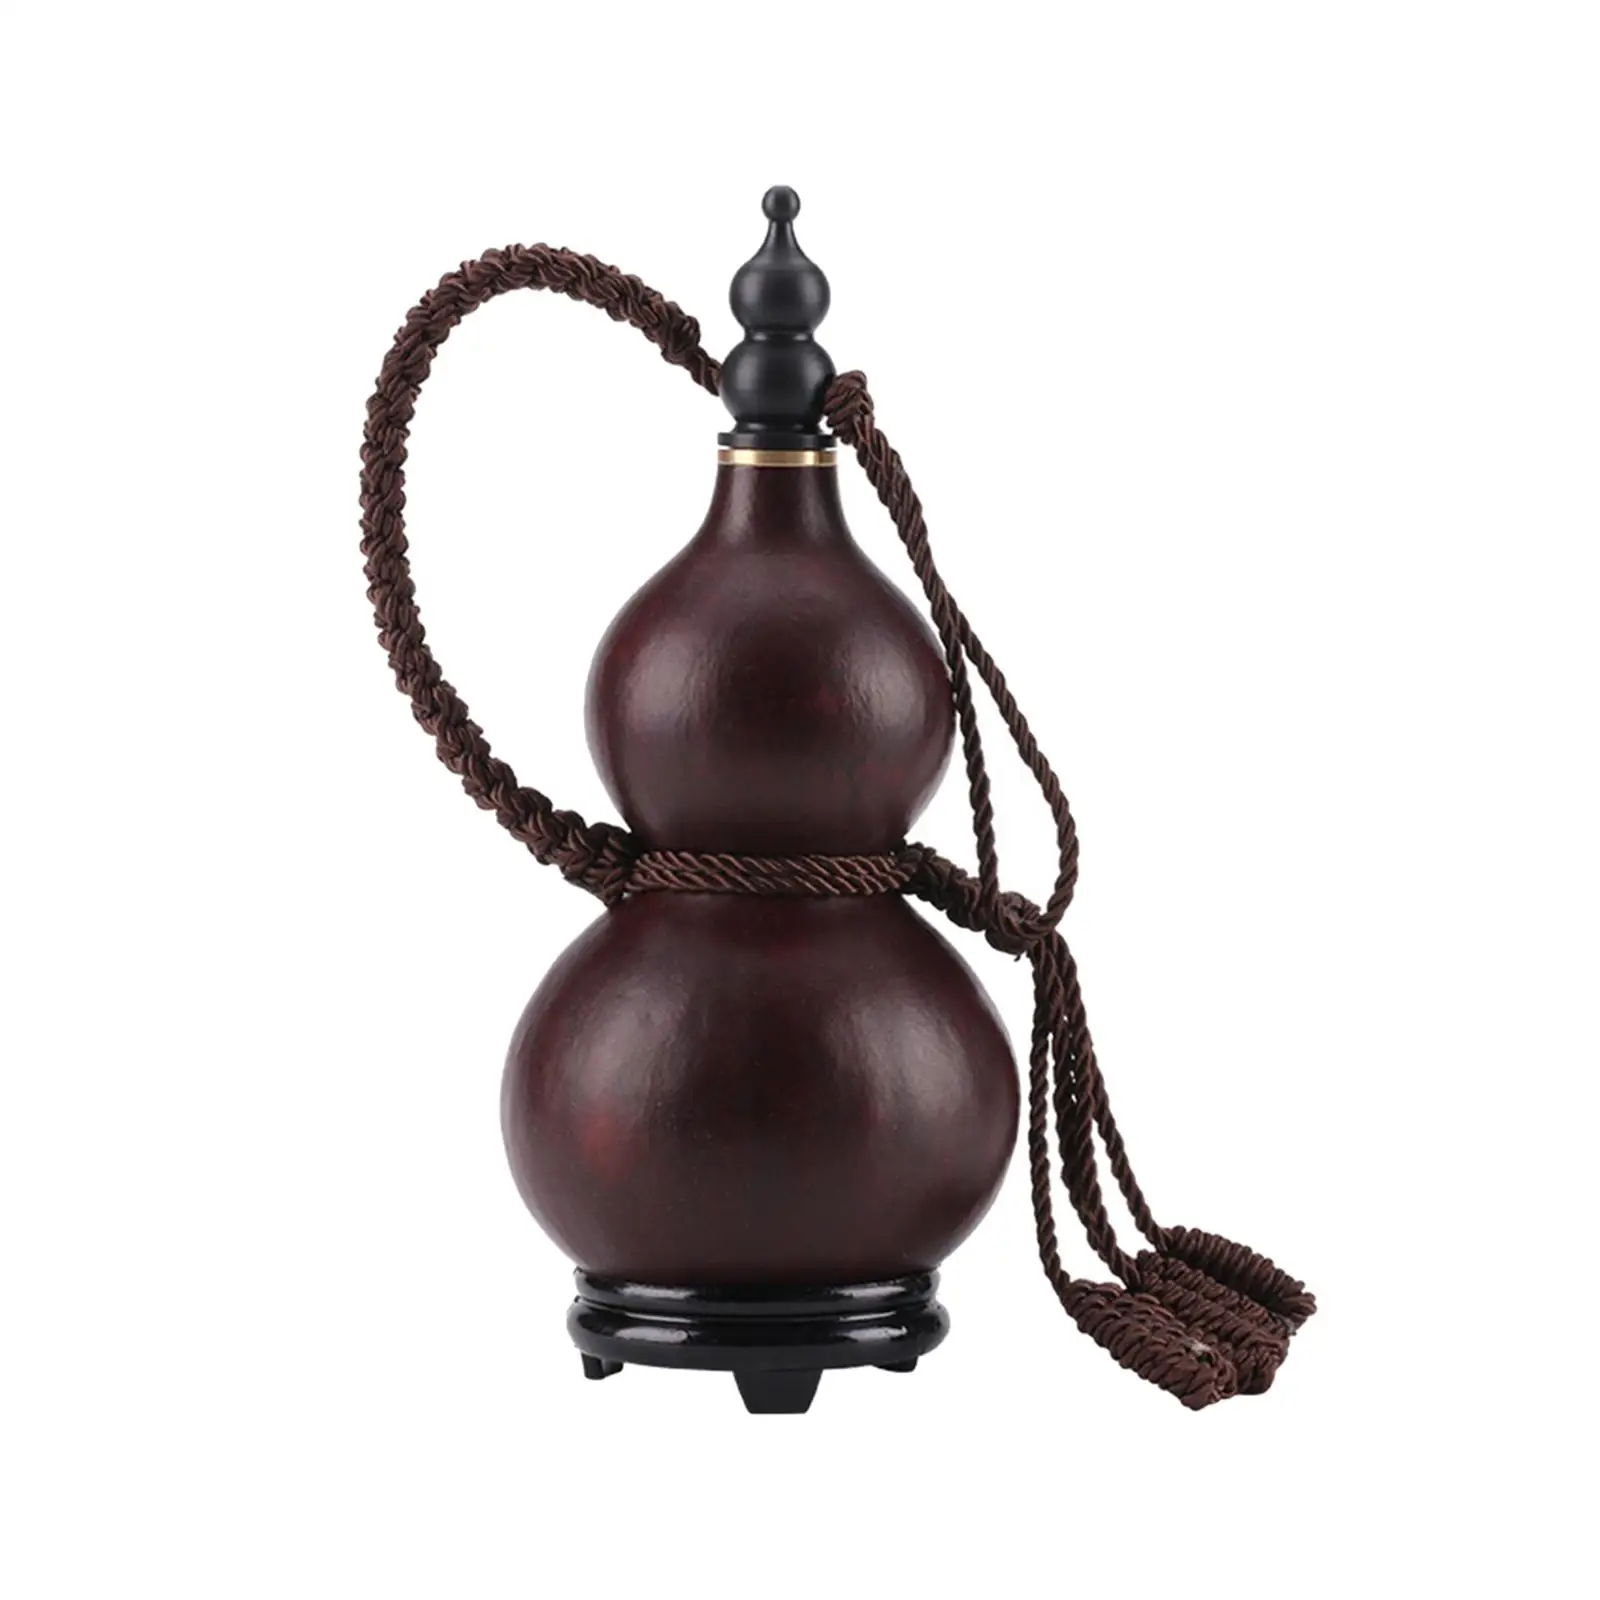 Traditional Gourd Wine Bottle Hollow Calabash with Lid Wine Gourd Portable for Camping drinks Holder Ornament